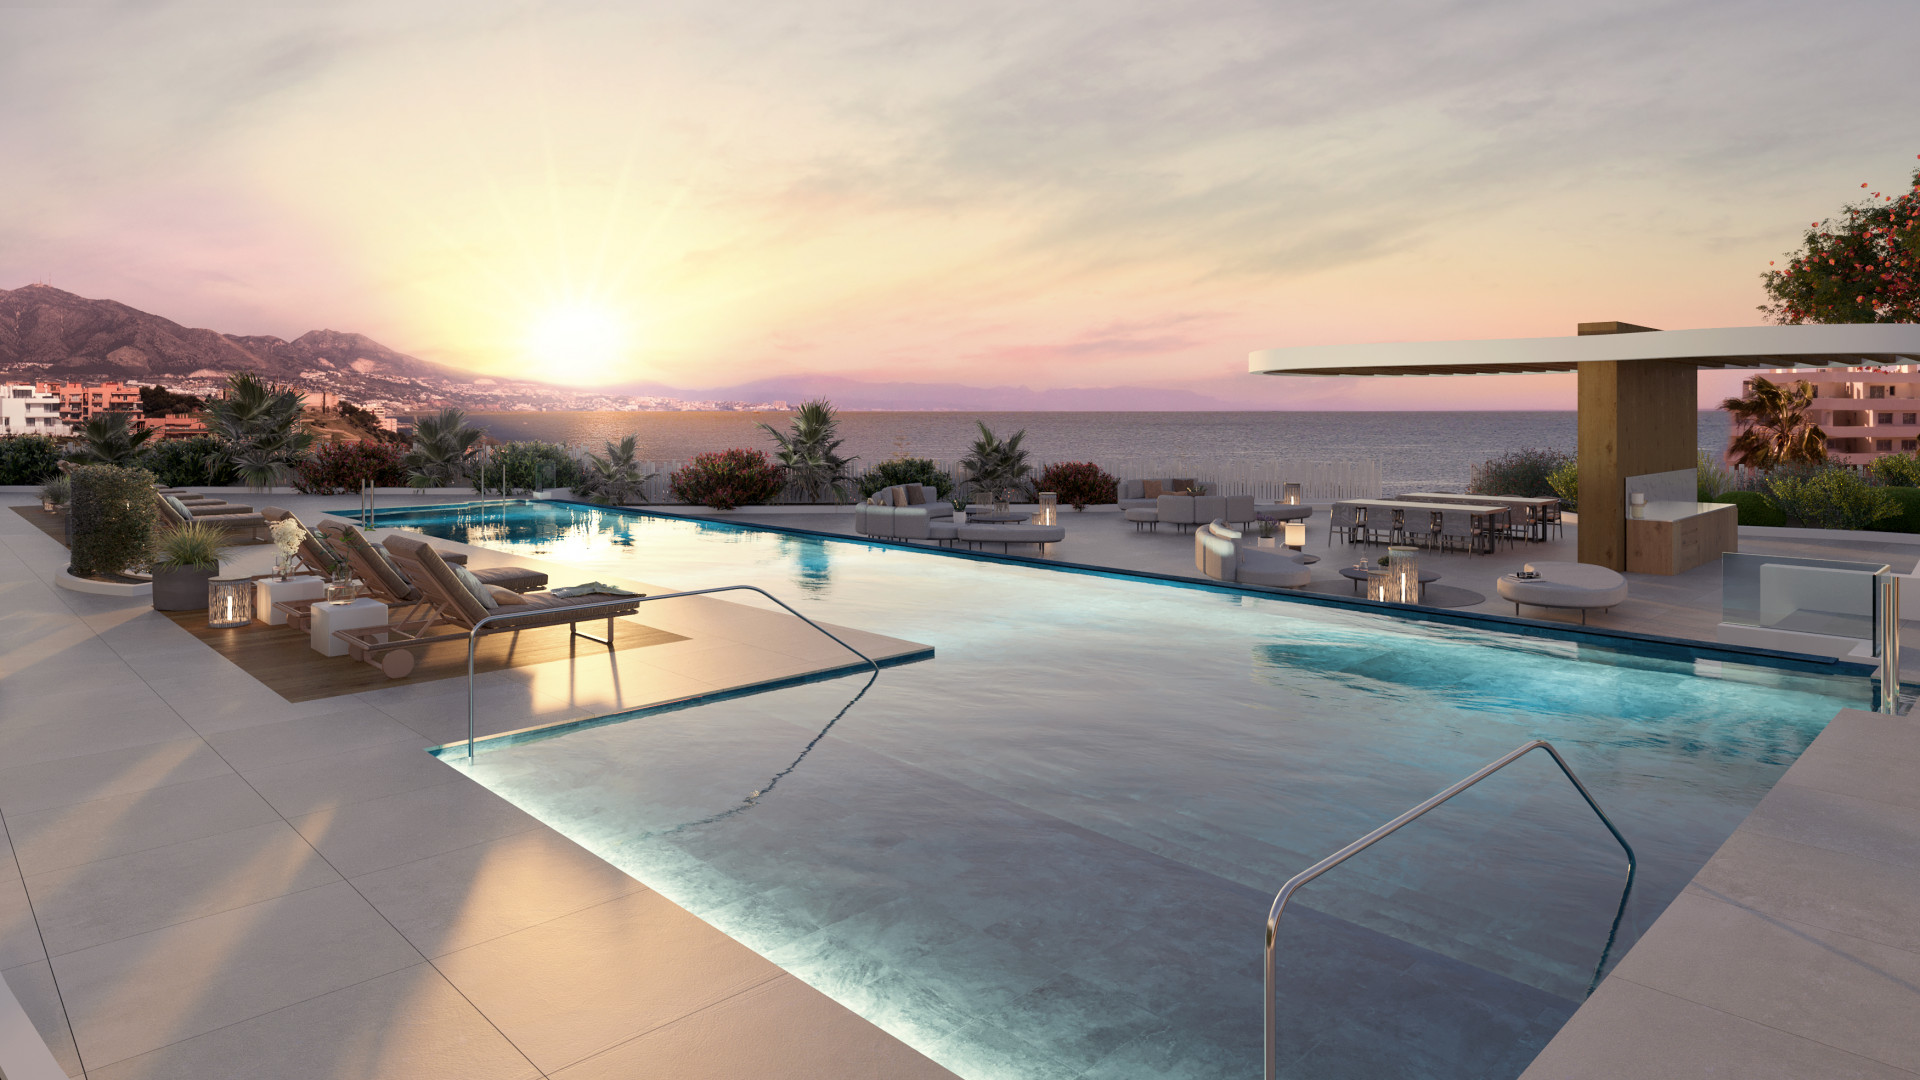 Off plan boutique complex of modern apartments by the sea in Mijas Costa - Fuengirola